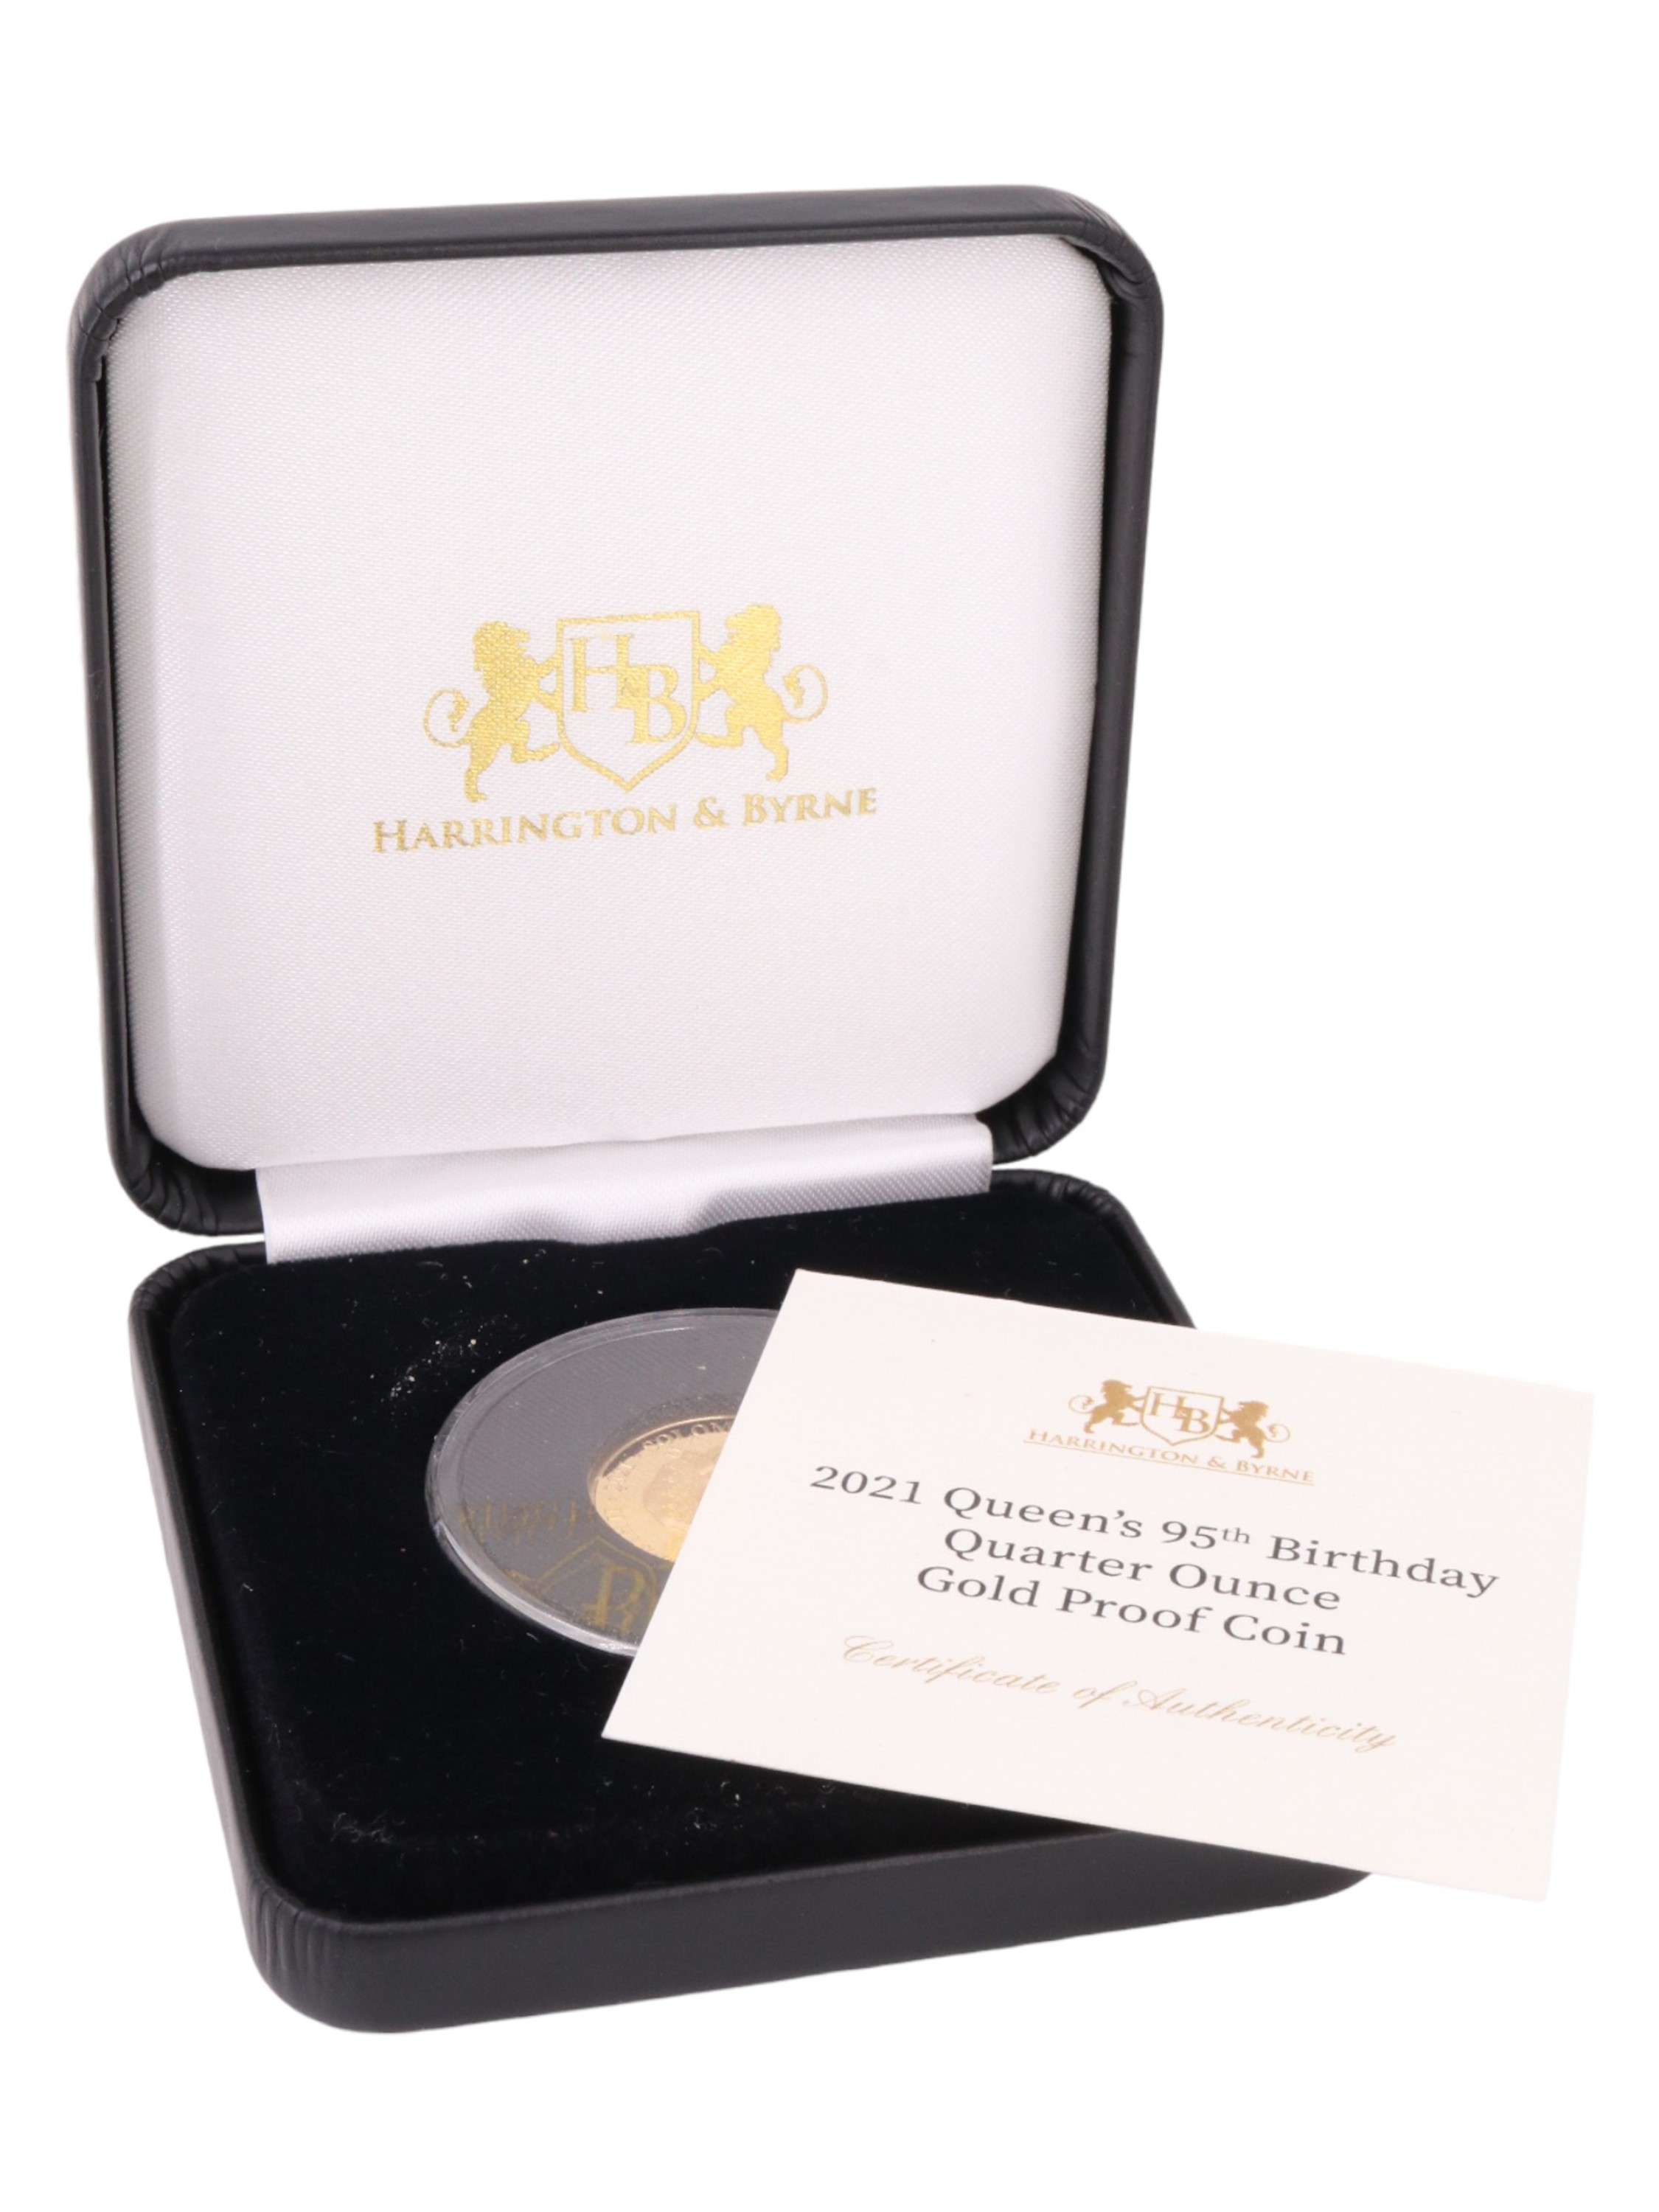 A cased 2021 Queen Elizabeth II commemorative proof gold coin, 8 g - Image 4 of 4